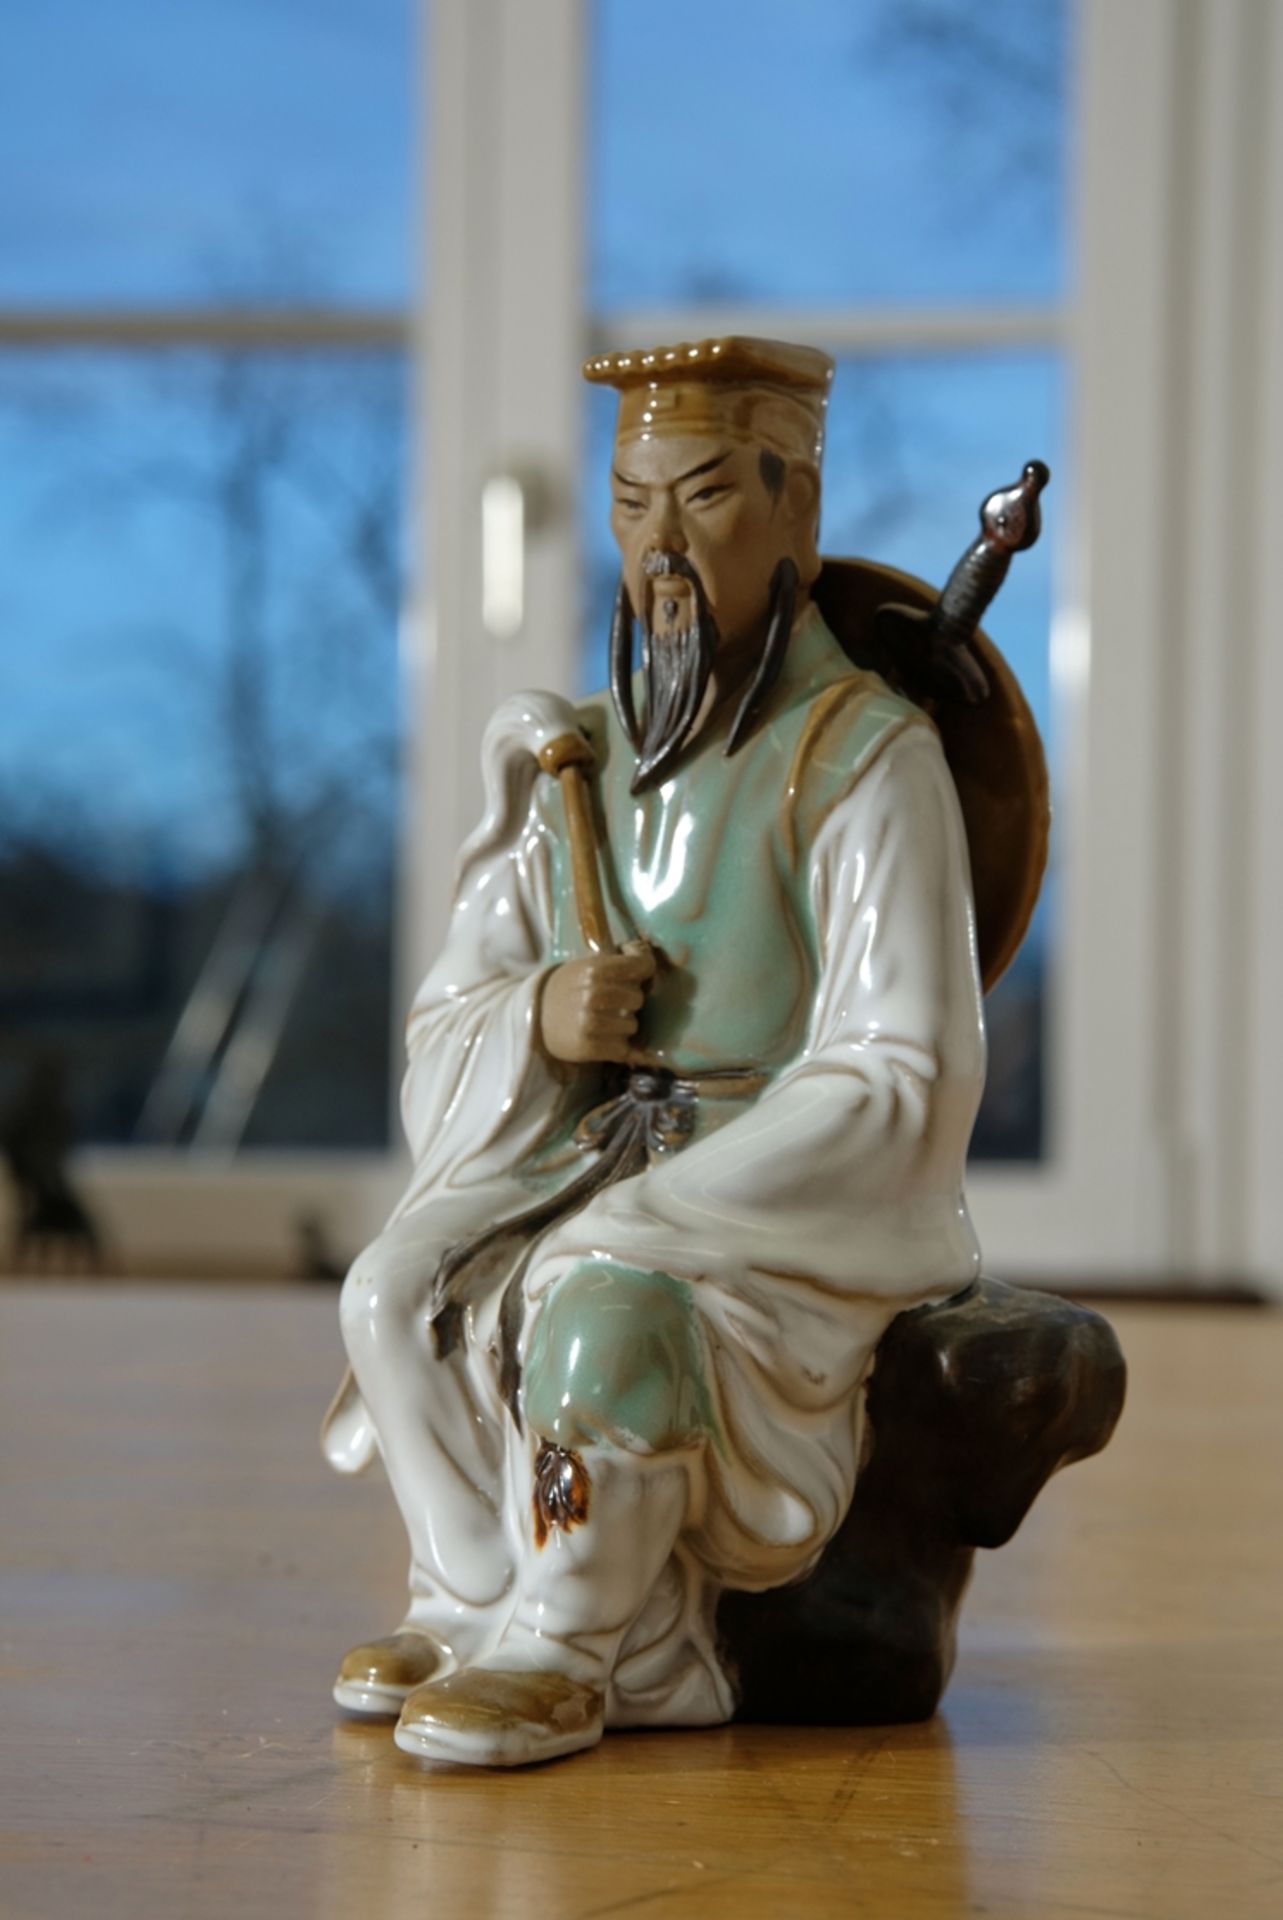 Warrior figure, Chinese. Ceramic. Sitting warrior, carrying sword and shield on his back, holding a